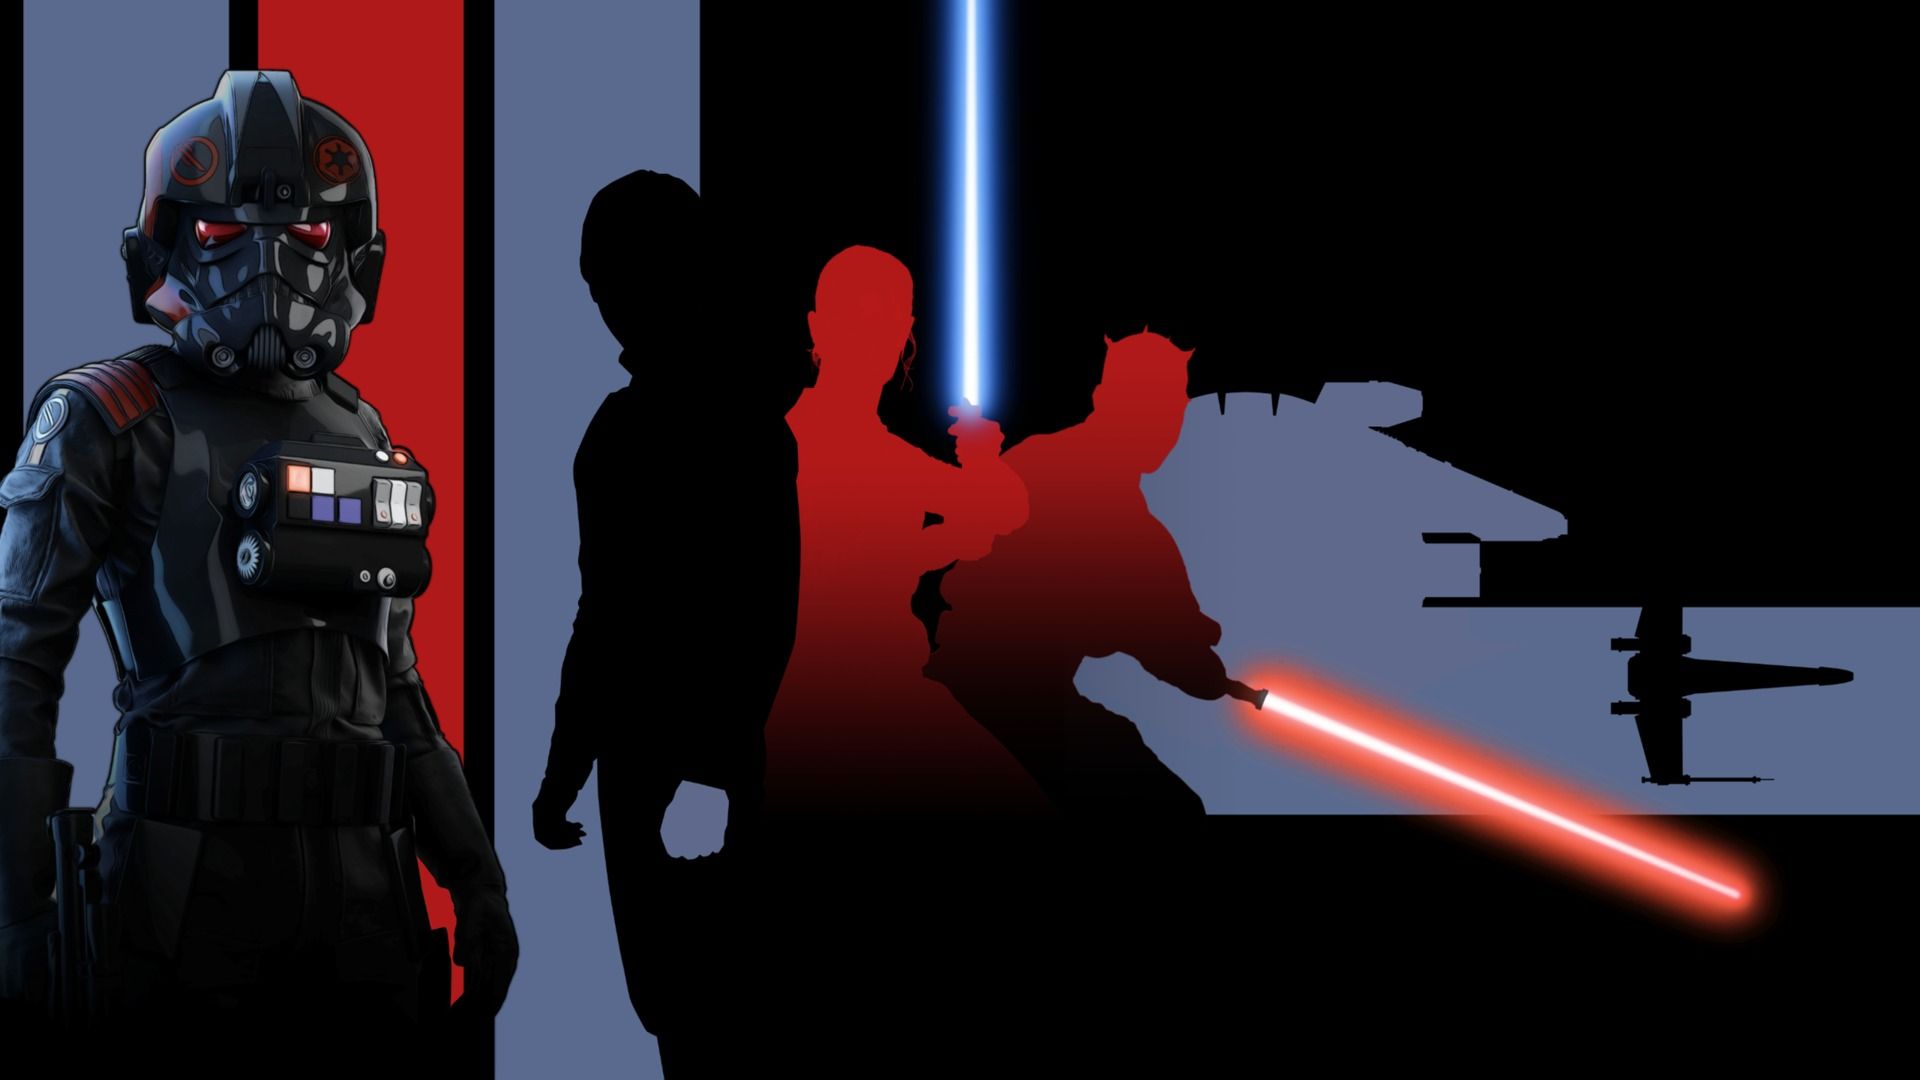 Heroes' silhouettes. Wallpaper from Star Wars: Battlefront II